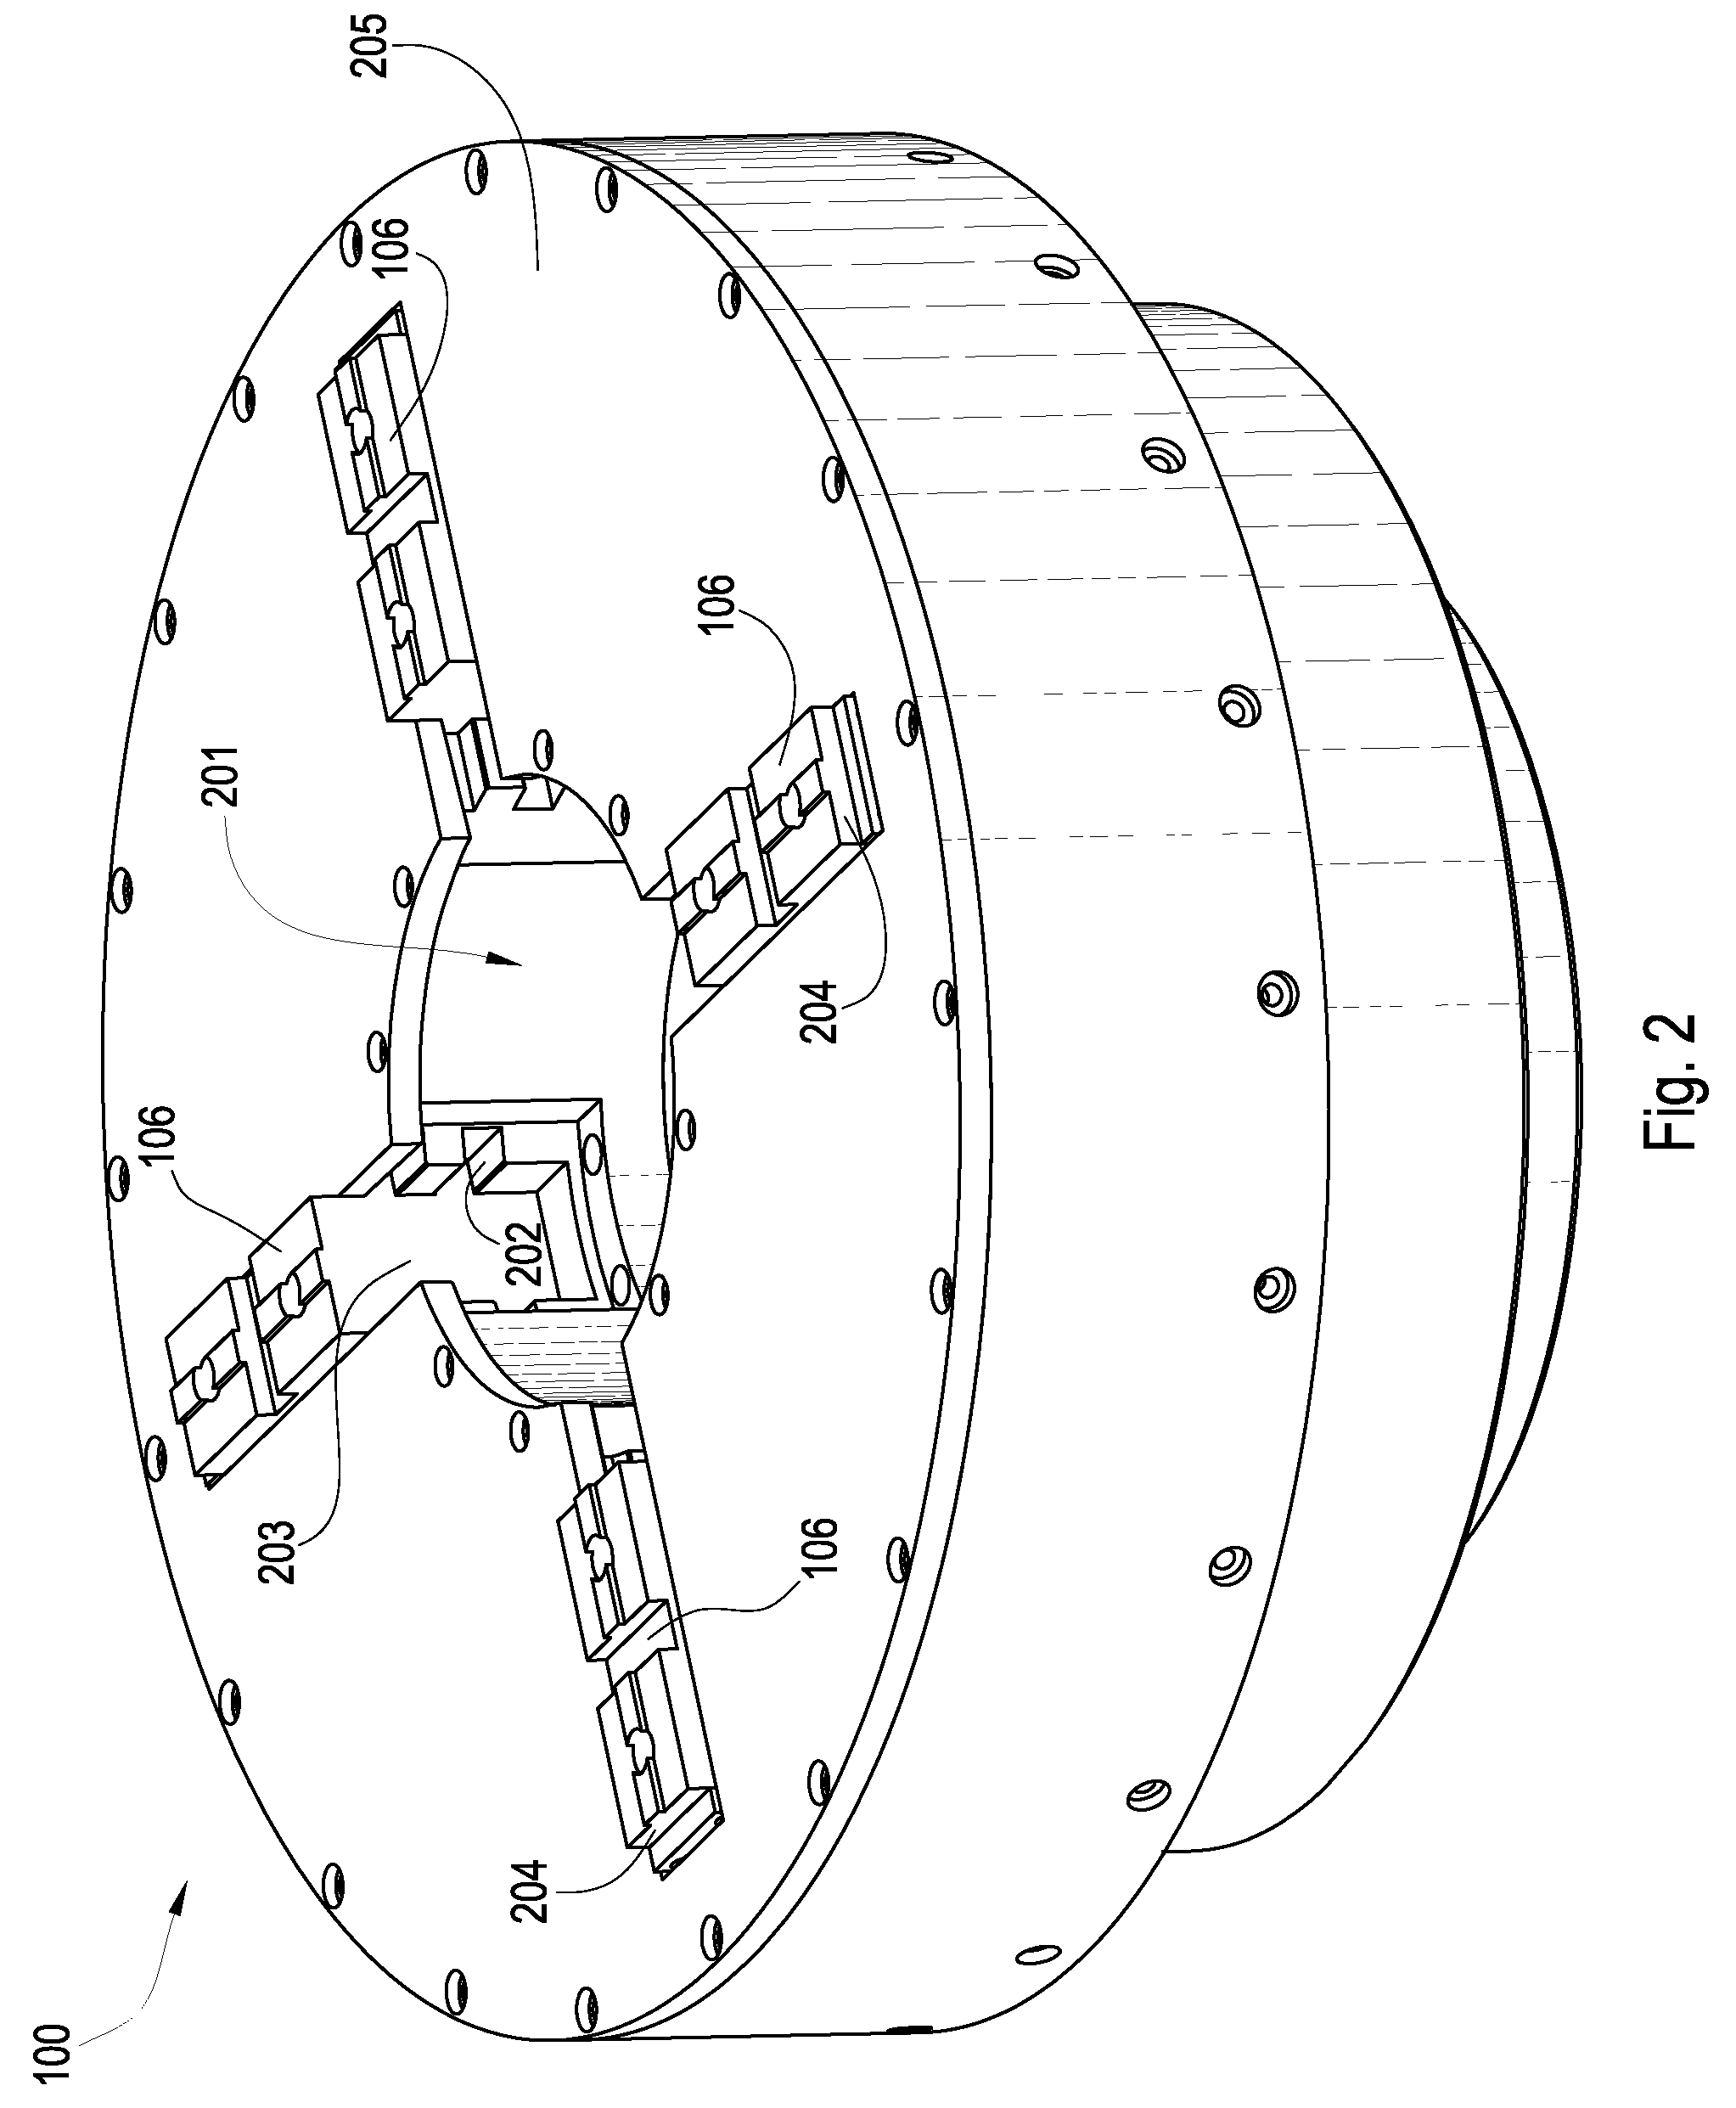 Hydraulic chuck with independently moveable jaws